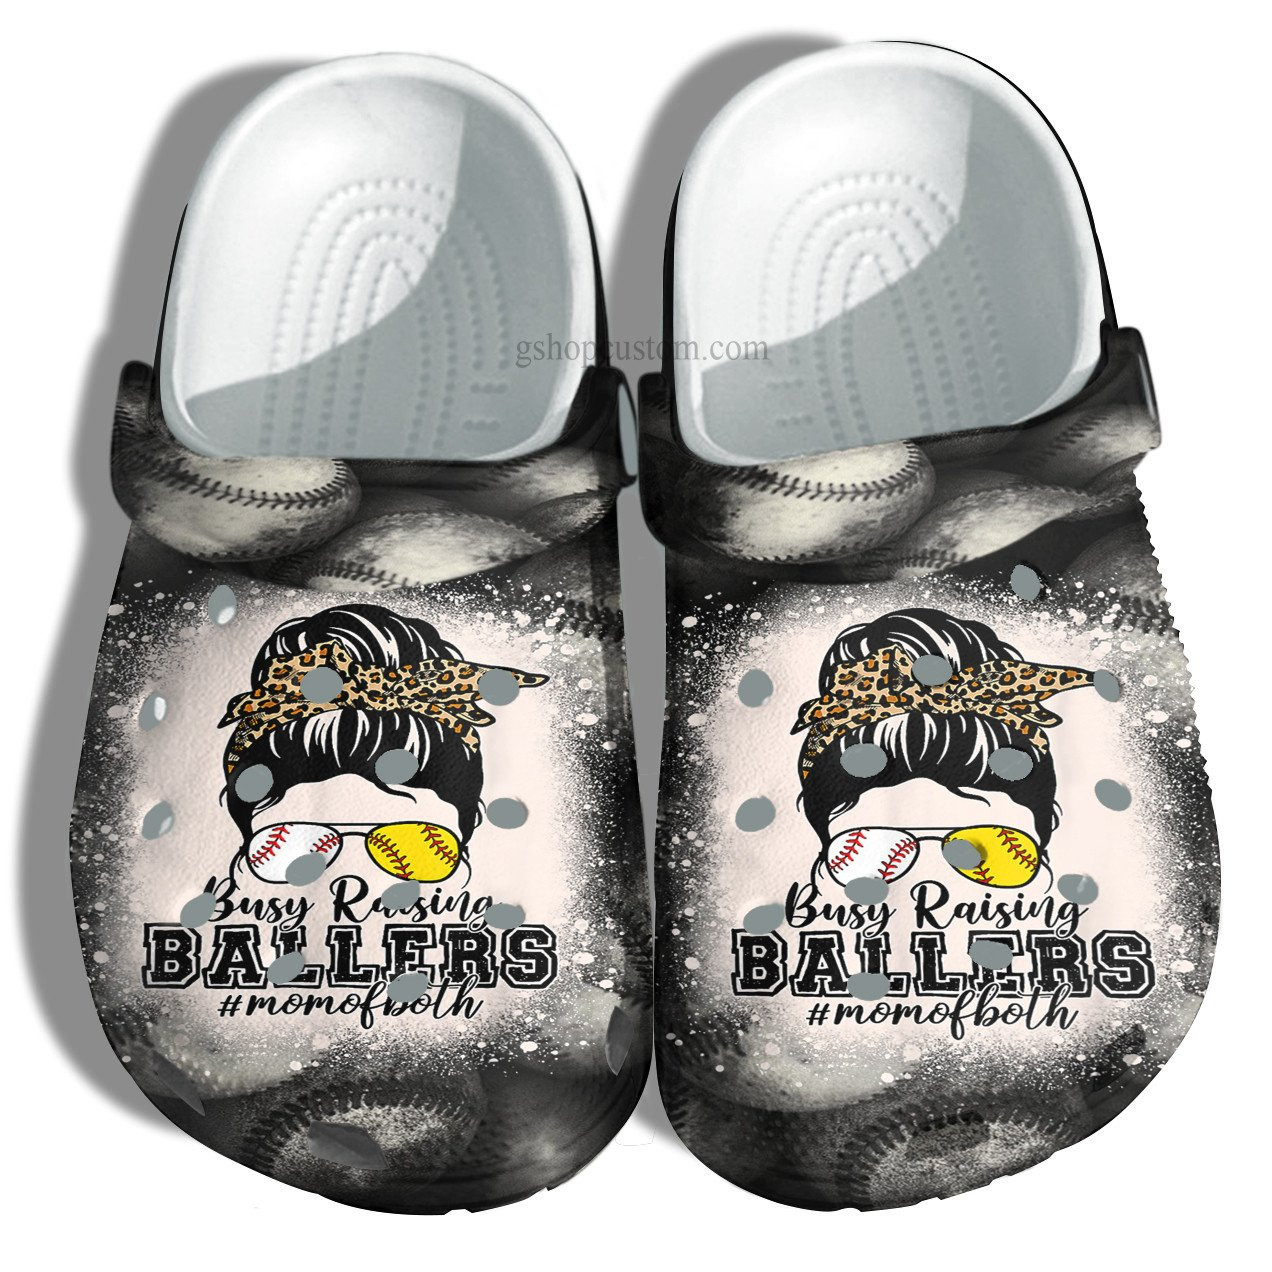 Baseball Mom Of Both Crocs Shoes For Mother Day - Baseball Mom Busy Raising Ballers Shoes Croc Clogs